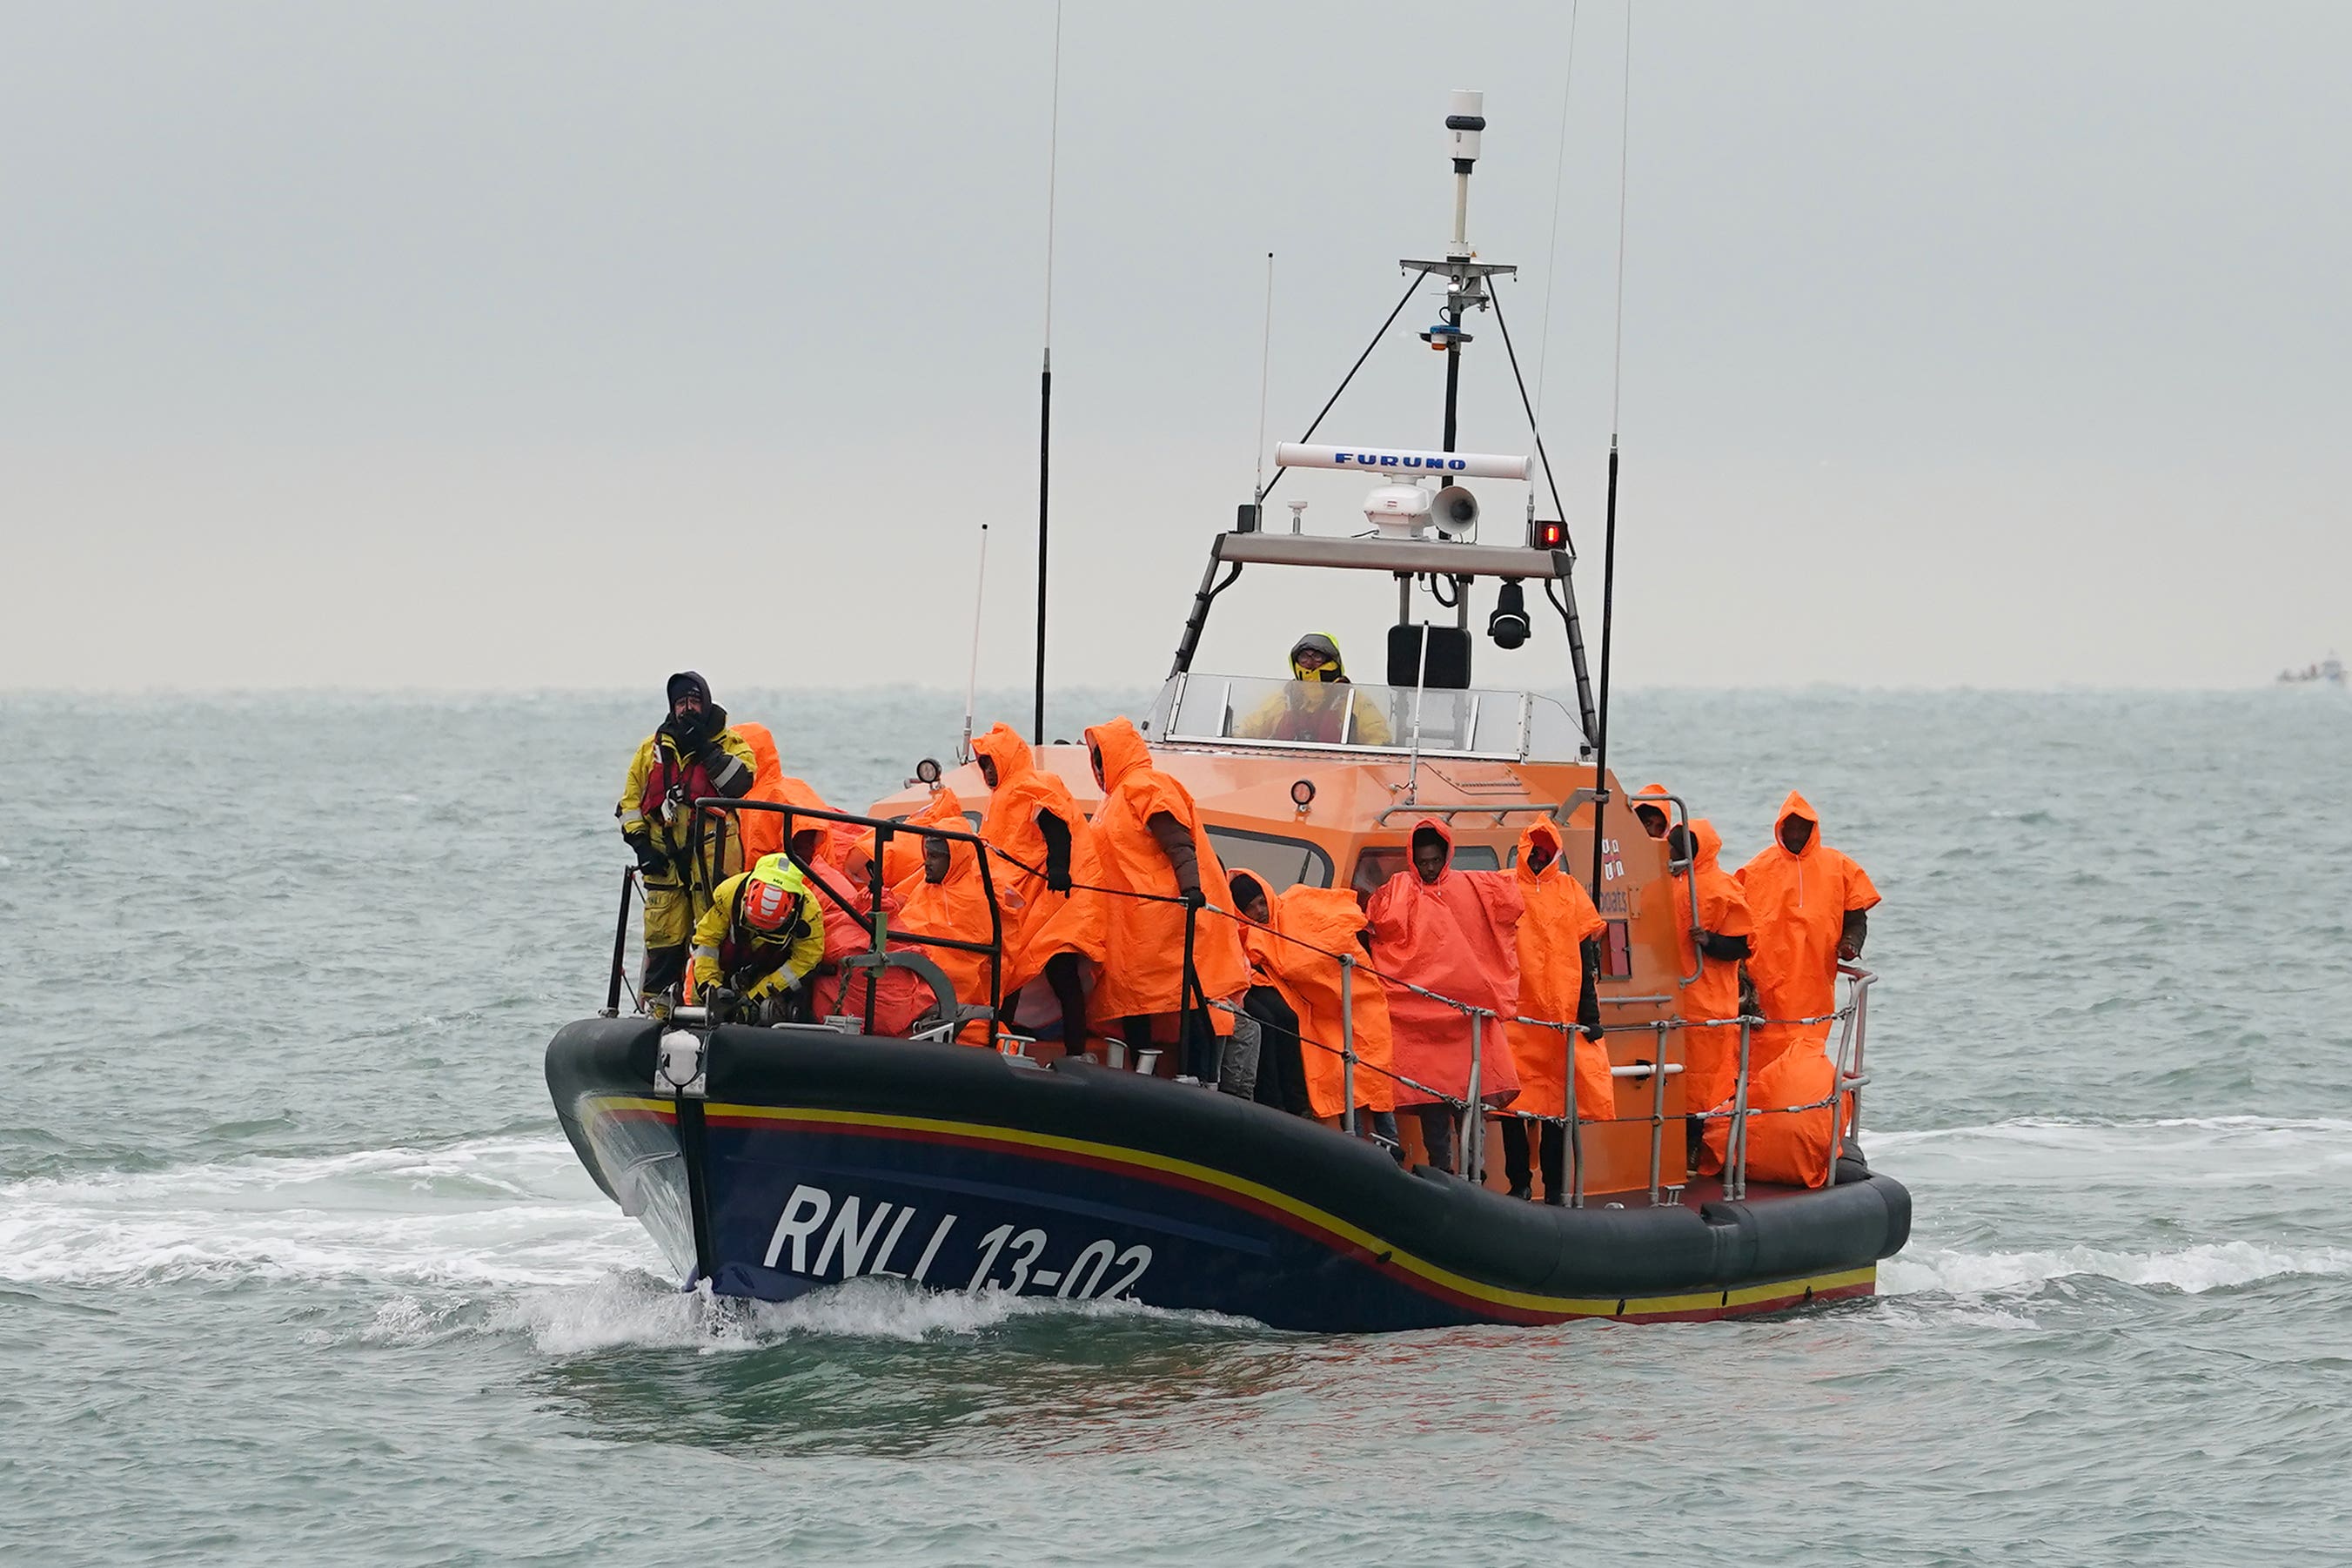 Thousands of people have been rescued from small boats in the Channel